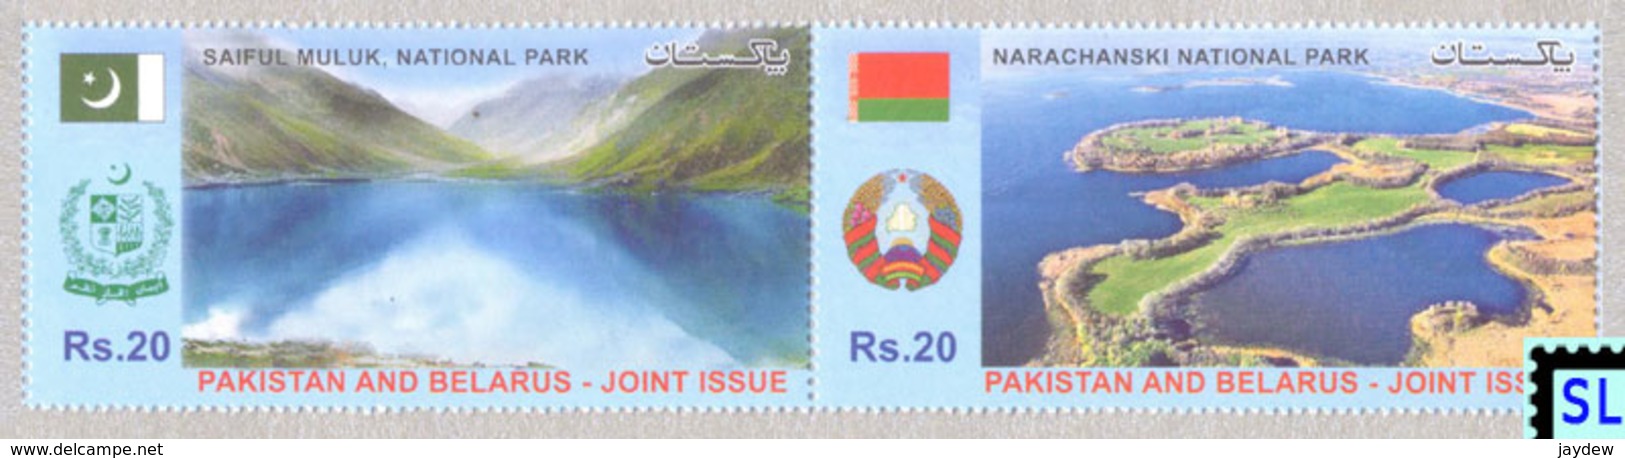 Pakistan Stamps 2016, Belarus, Joint Issue, National Parks, MNH - Pakistan